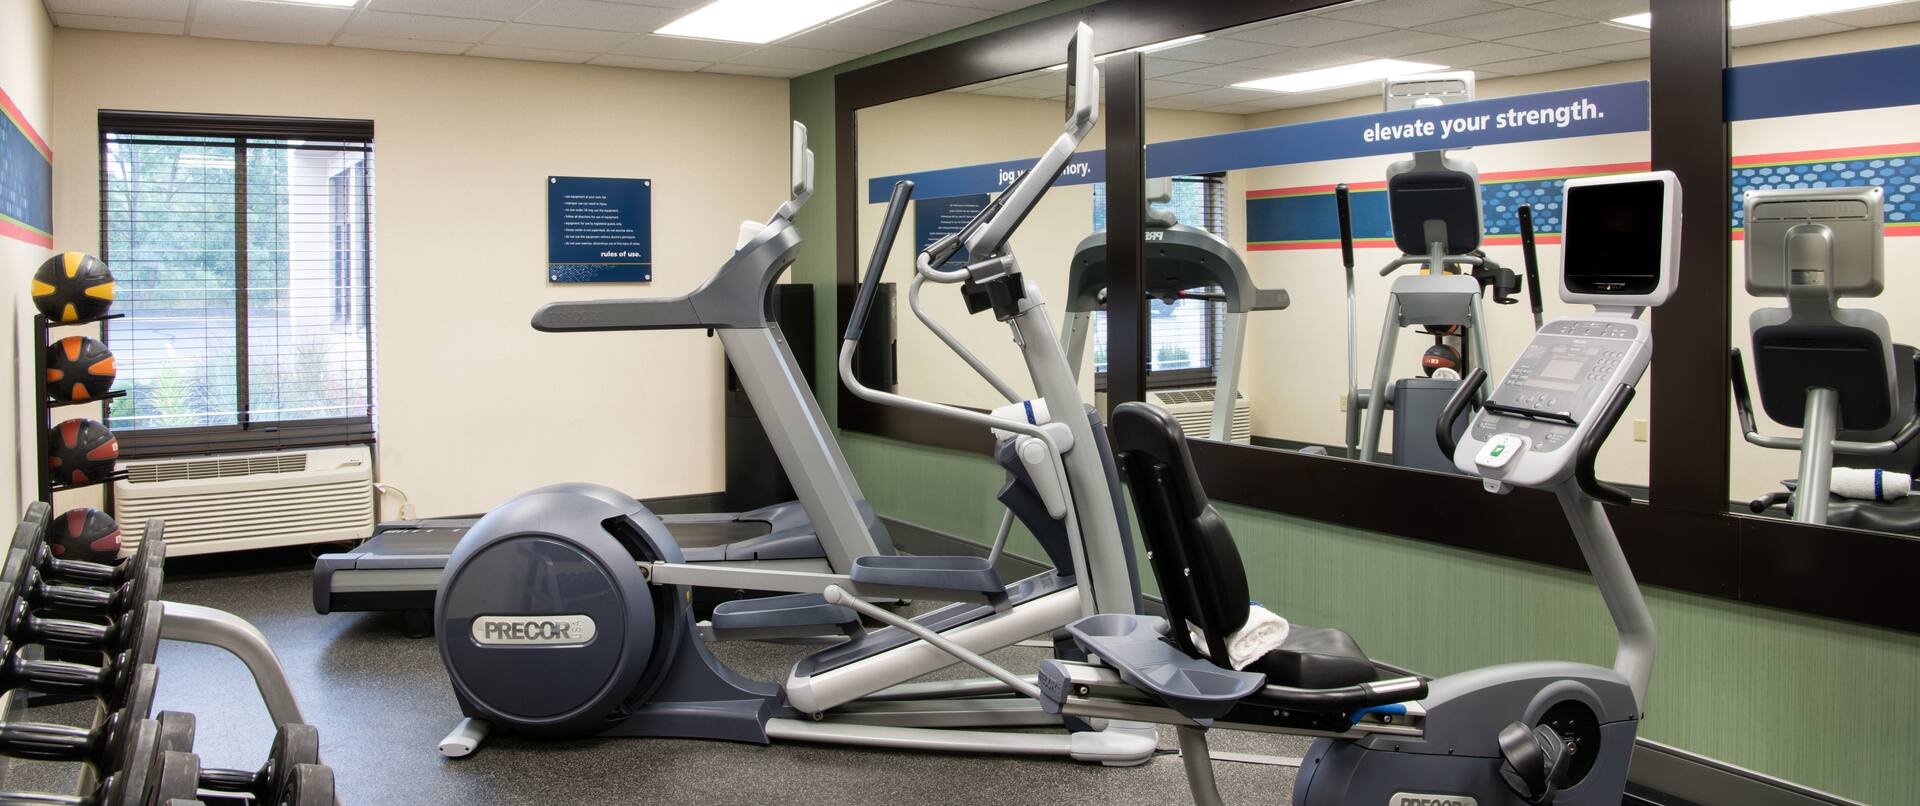 On-Site Fitness Center - Elliptical, Treadmill, Free Weights 